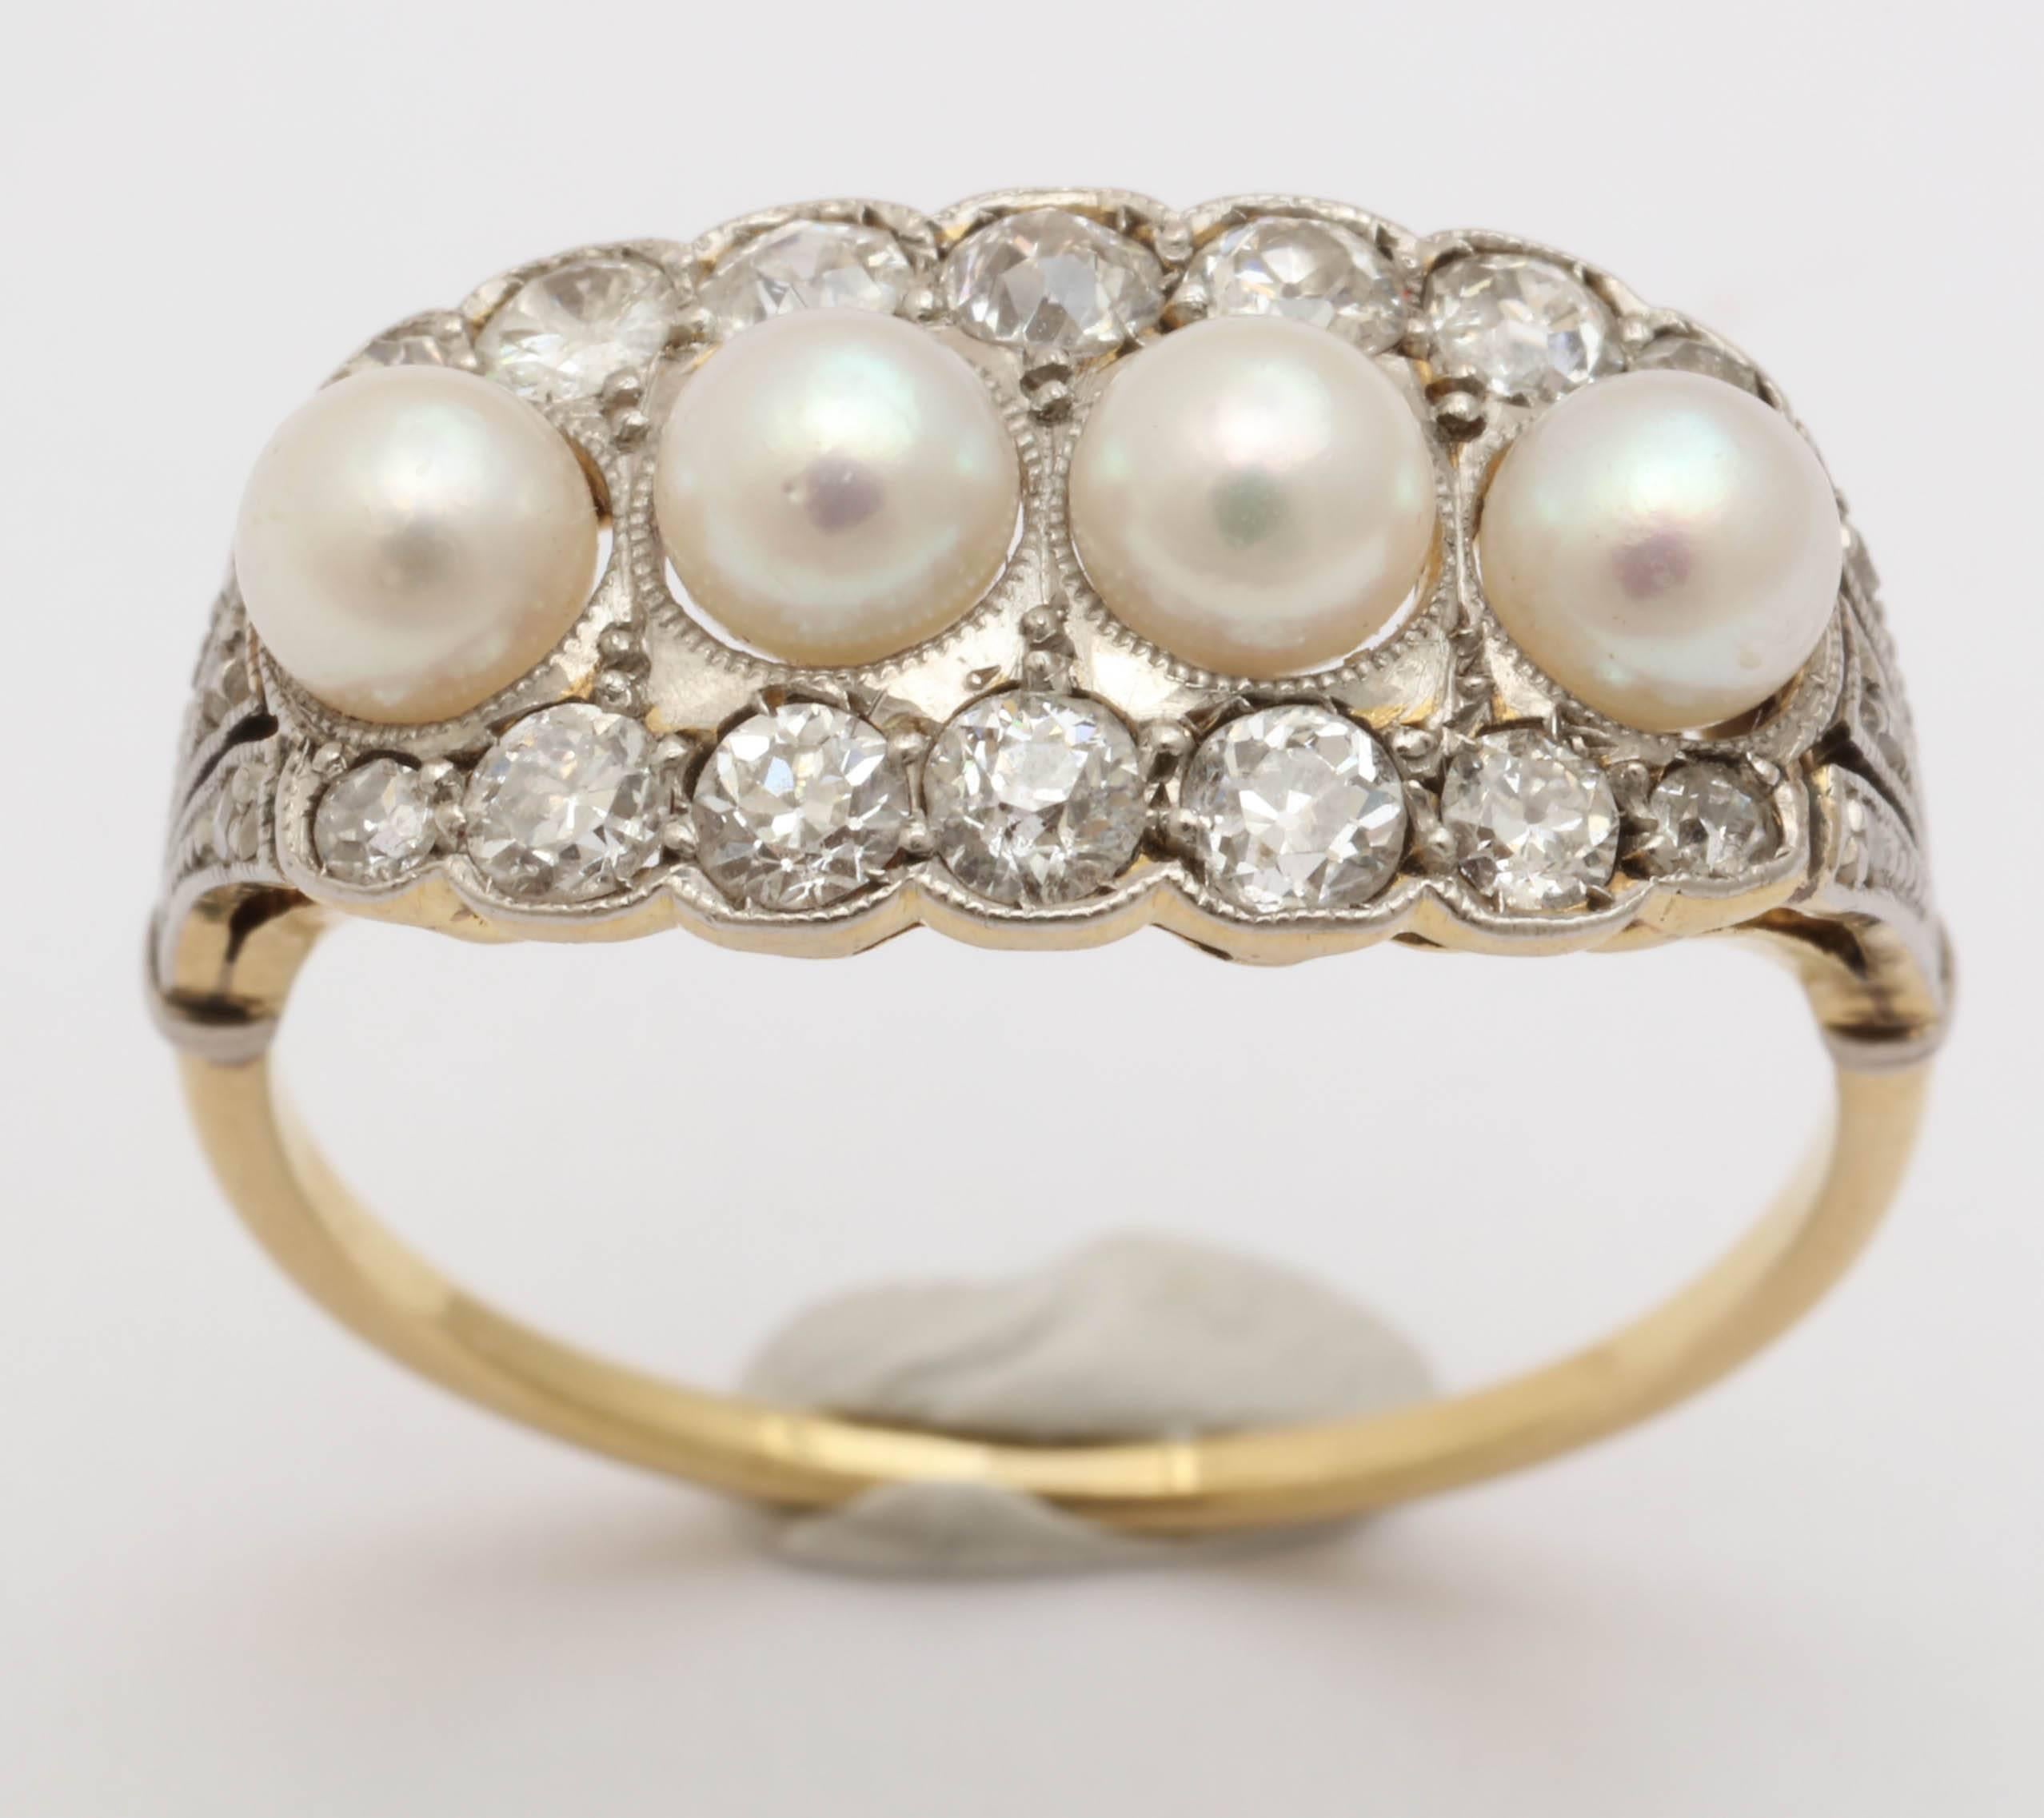 Edwardian English ring, platinum on 18K yellow gold. Set with 4 full natural pearls and 20 diamonds: row of 5 central diamonds on each side of pearls (approx. .07 -.10 ct), 2 smaller diamonds at rows' ends (approx .02 ct), 3 tiny diamonds on